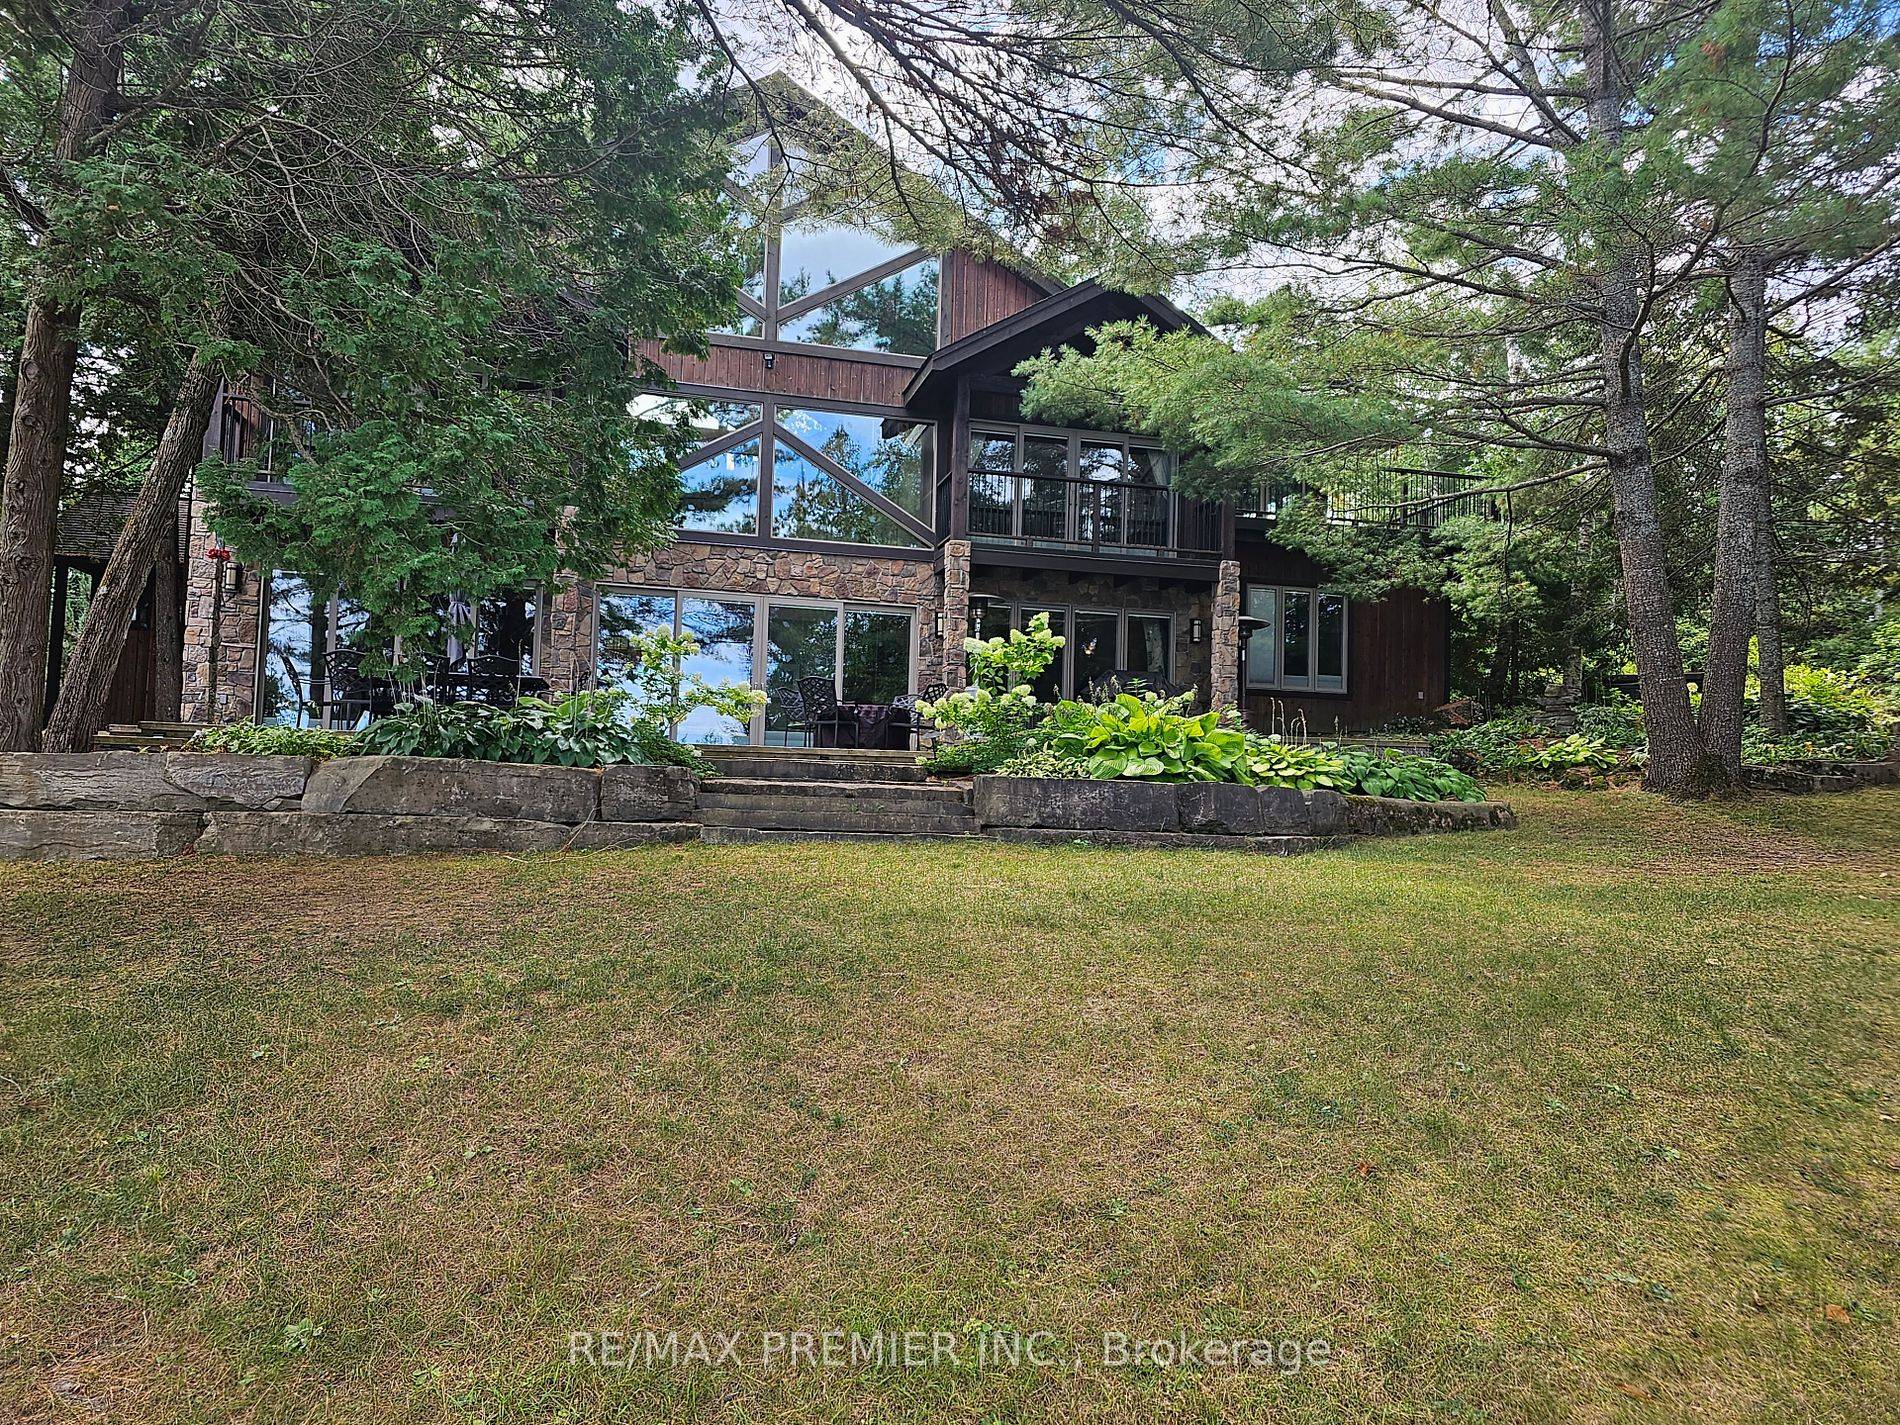 4 Season Waterfront Masterpiece Under Power of Sale by the First Mortage Holder Plus 1000 Feet of Shoreline on Paudash Lake Qver 2 Acres of Natural Wooded Area, Gated Entrance ...